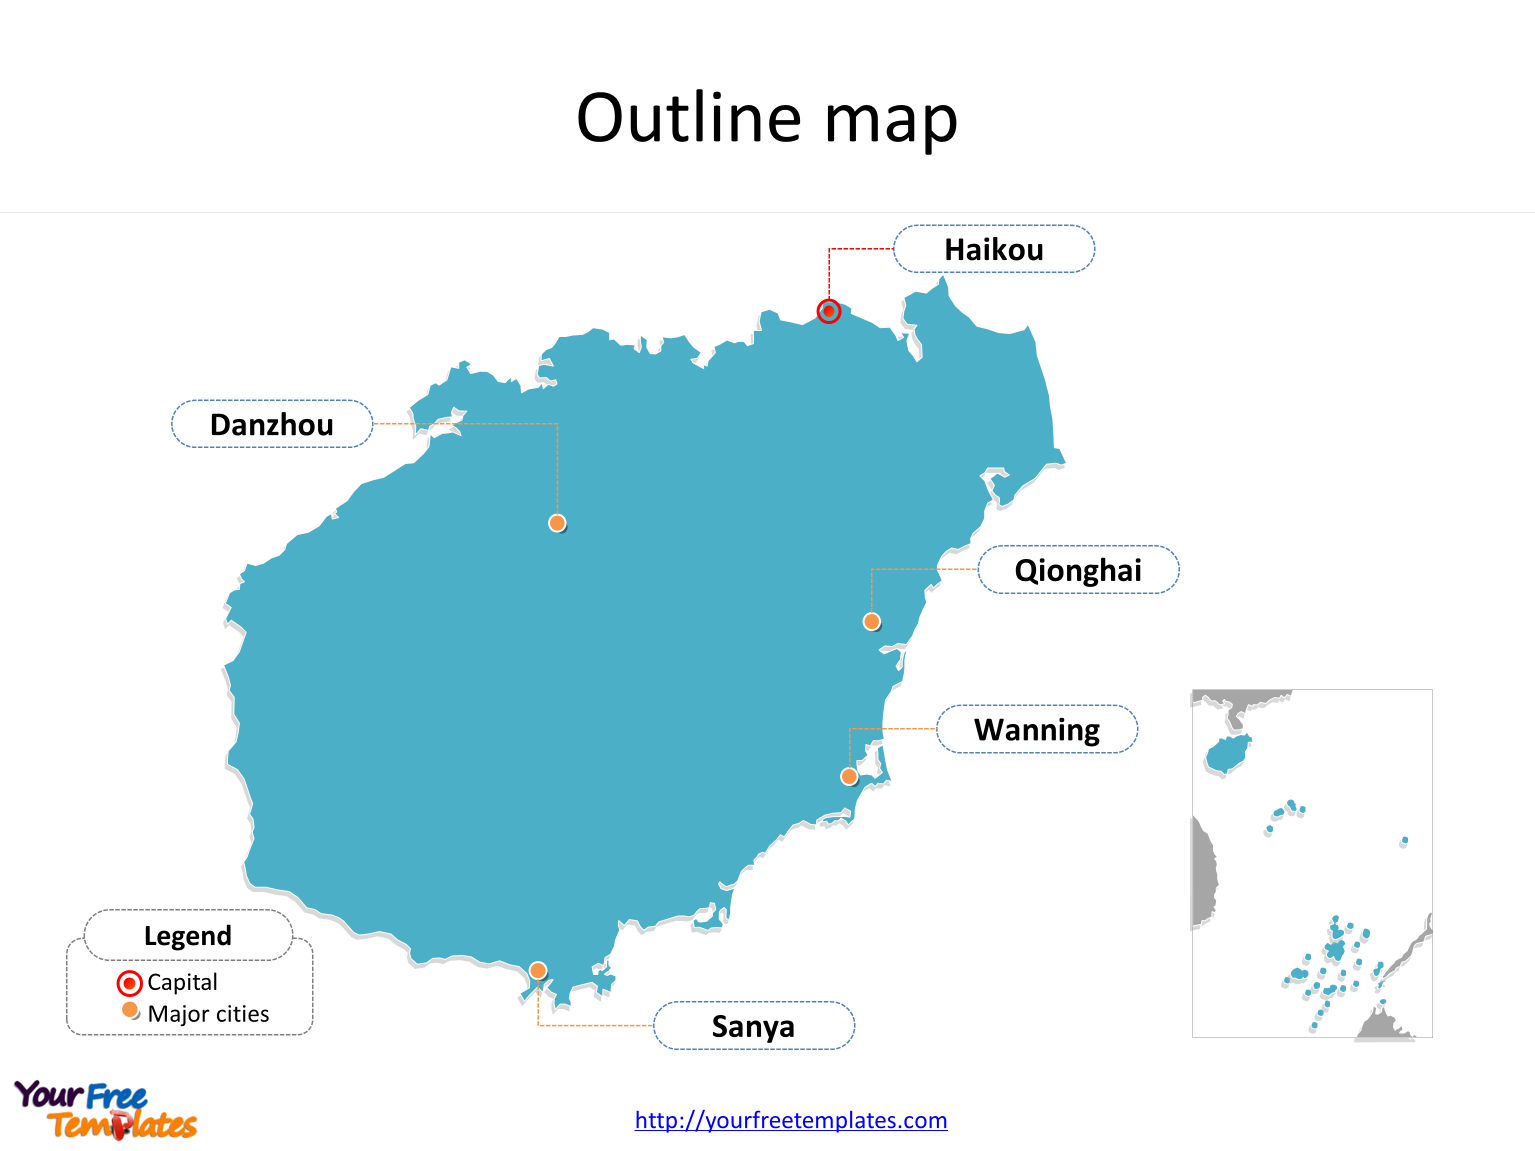 Province of Hainan map with outline and cities labeled on the Hainan maps PowerPoint templates